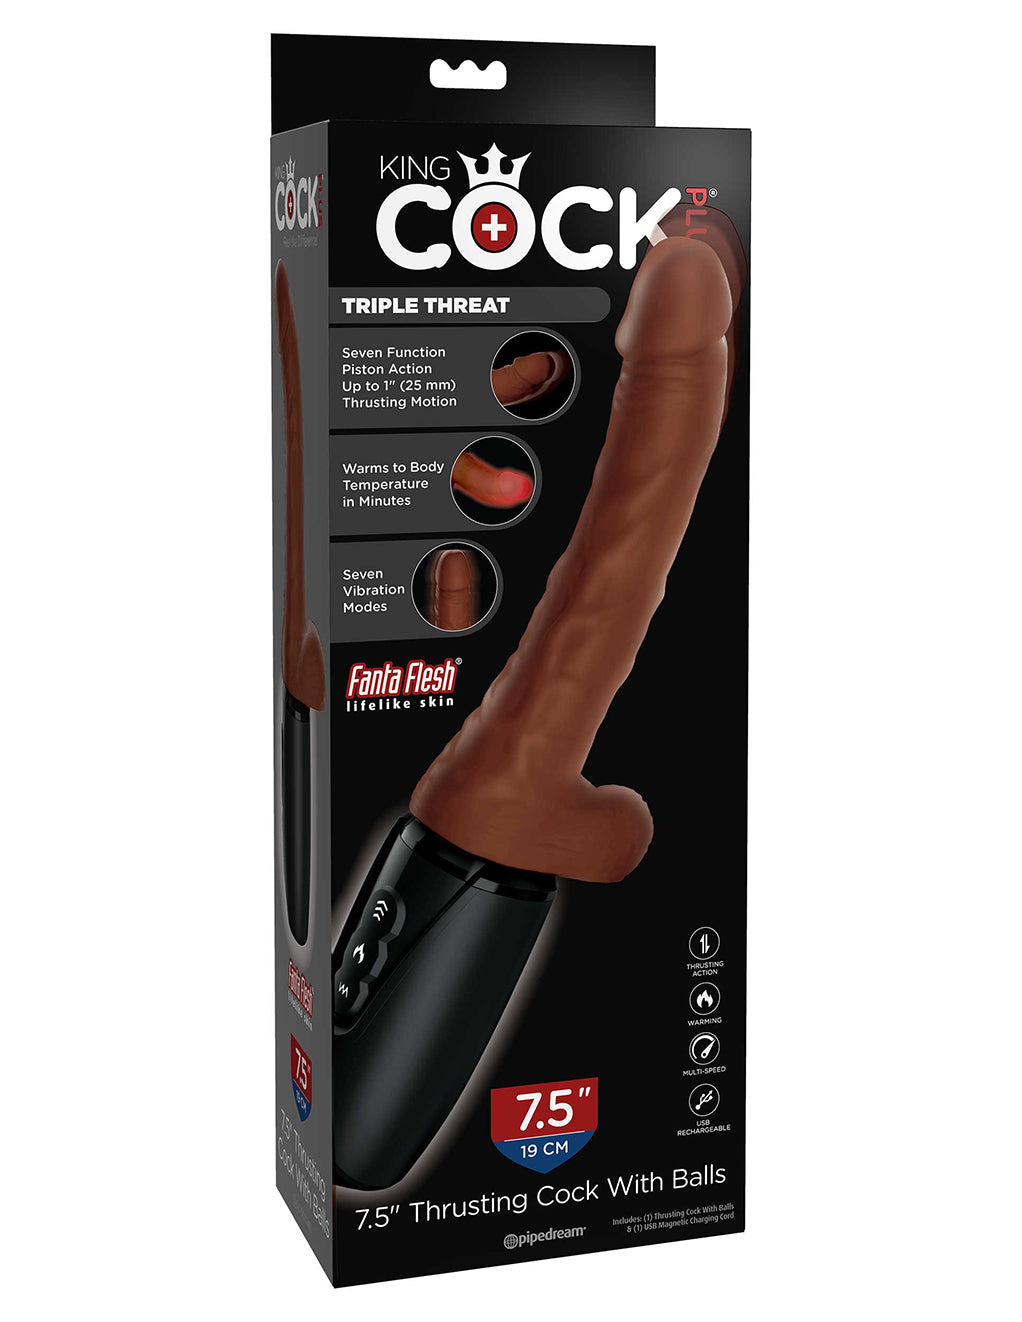 King Cock Plus 7.5" Thrusting Cock with Balls- Package